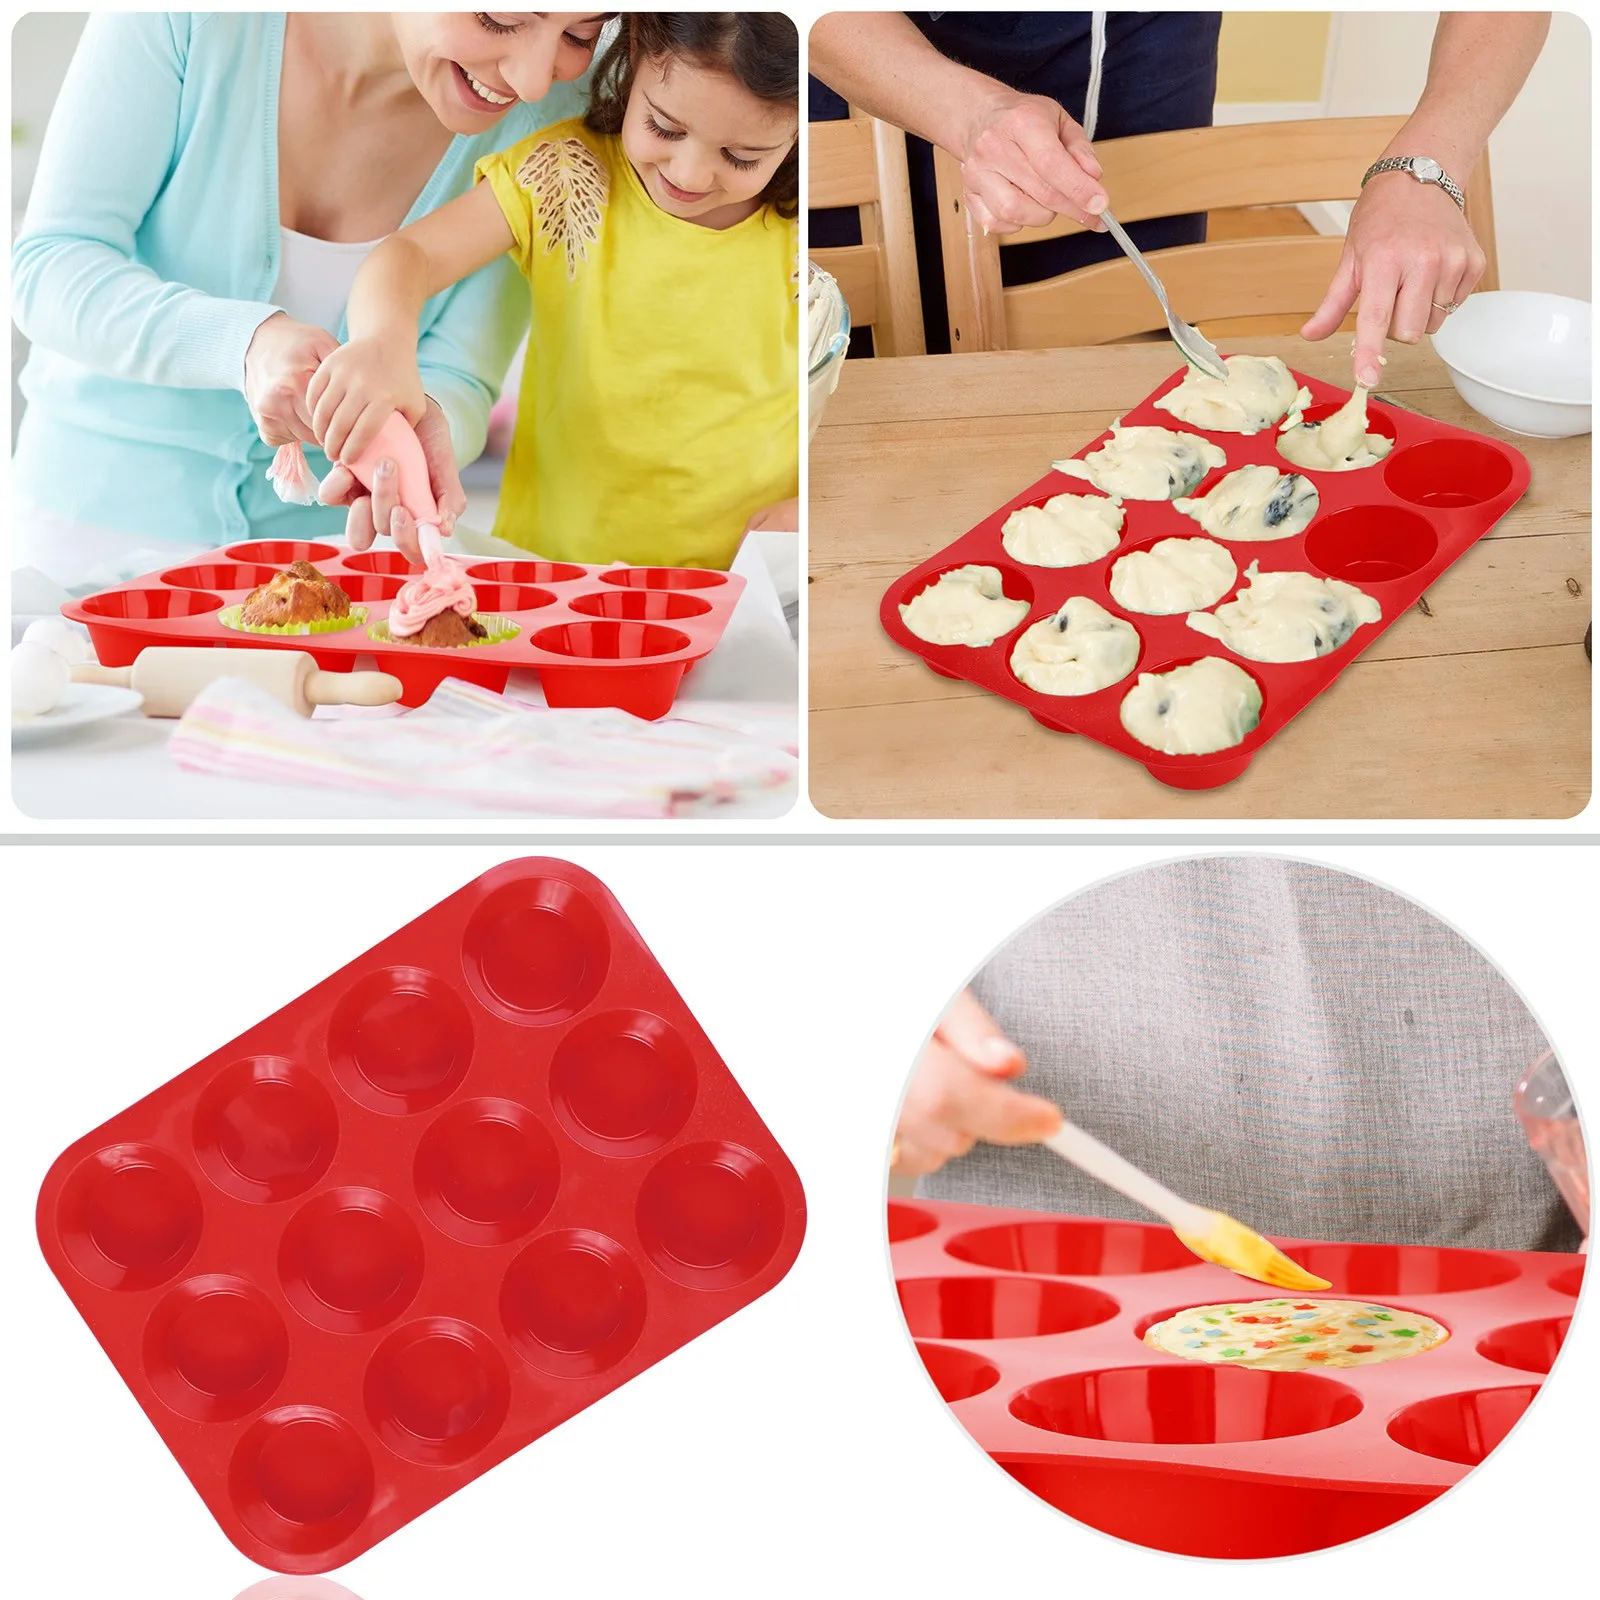 

3d Baking Mold For Pastry Shape Accessories Cake Decorating Tools Silicone Mould Bakeware Muffin Cupcake Molds Kitchen Supplies